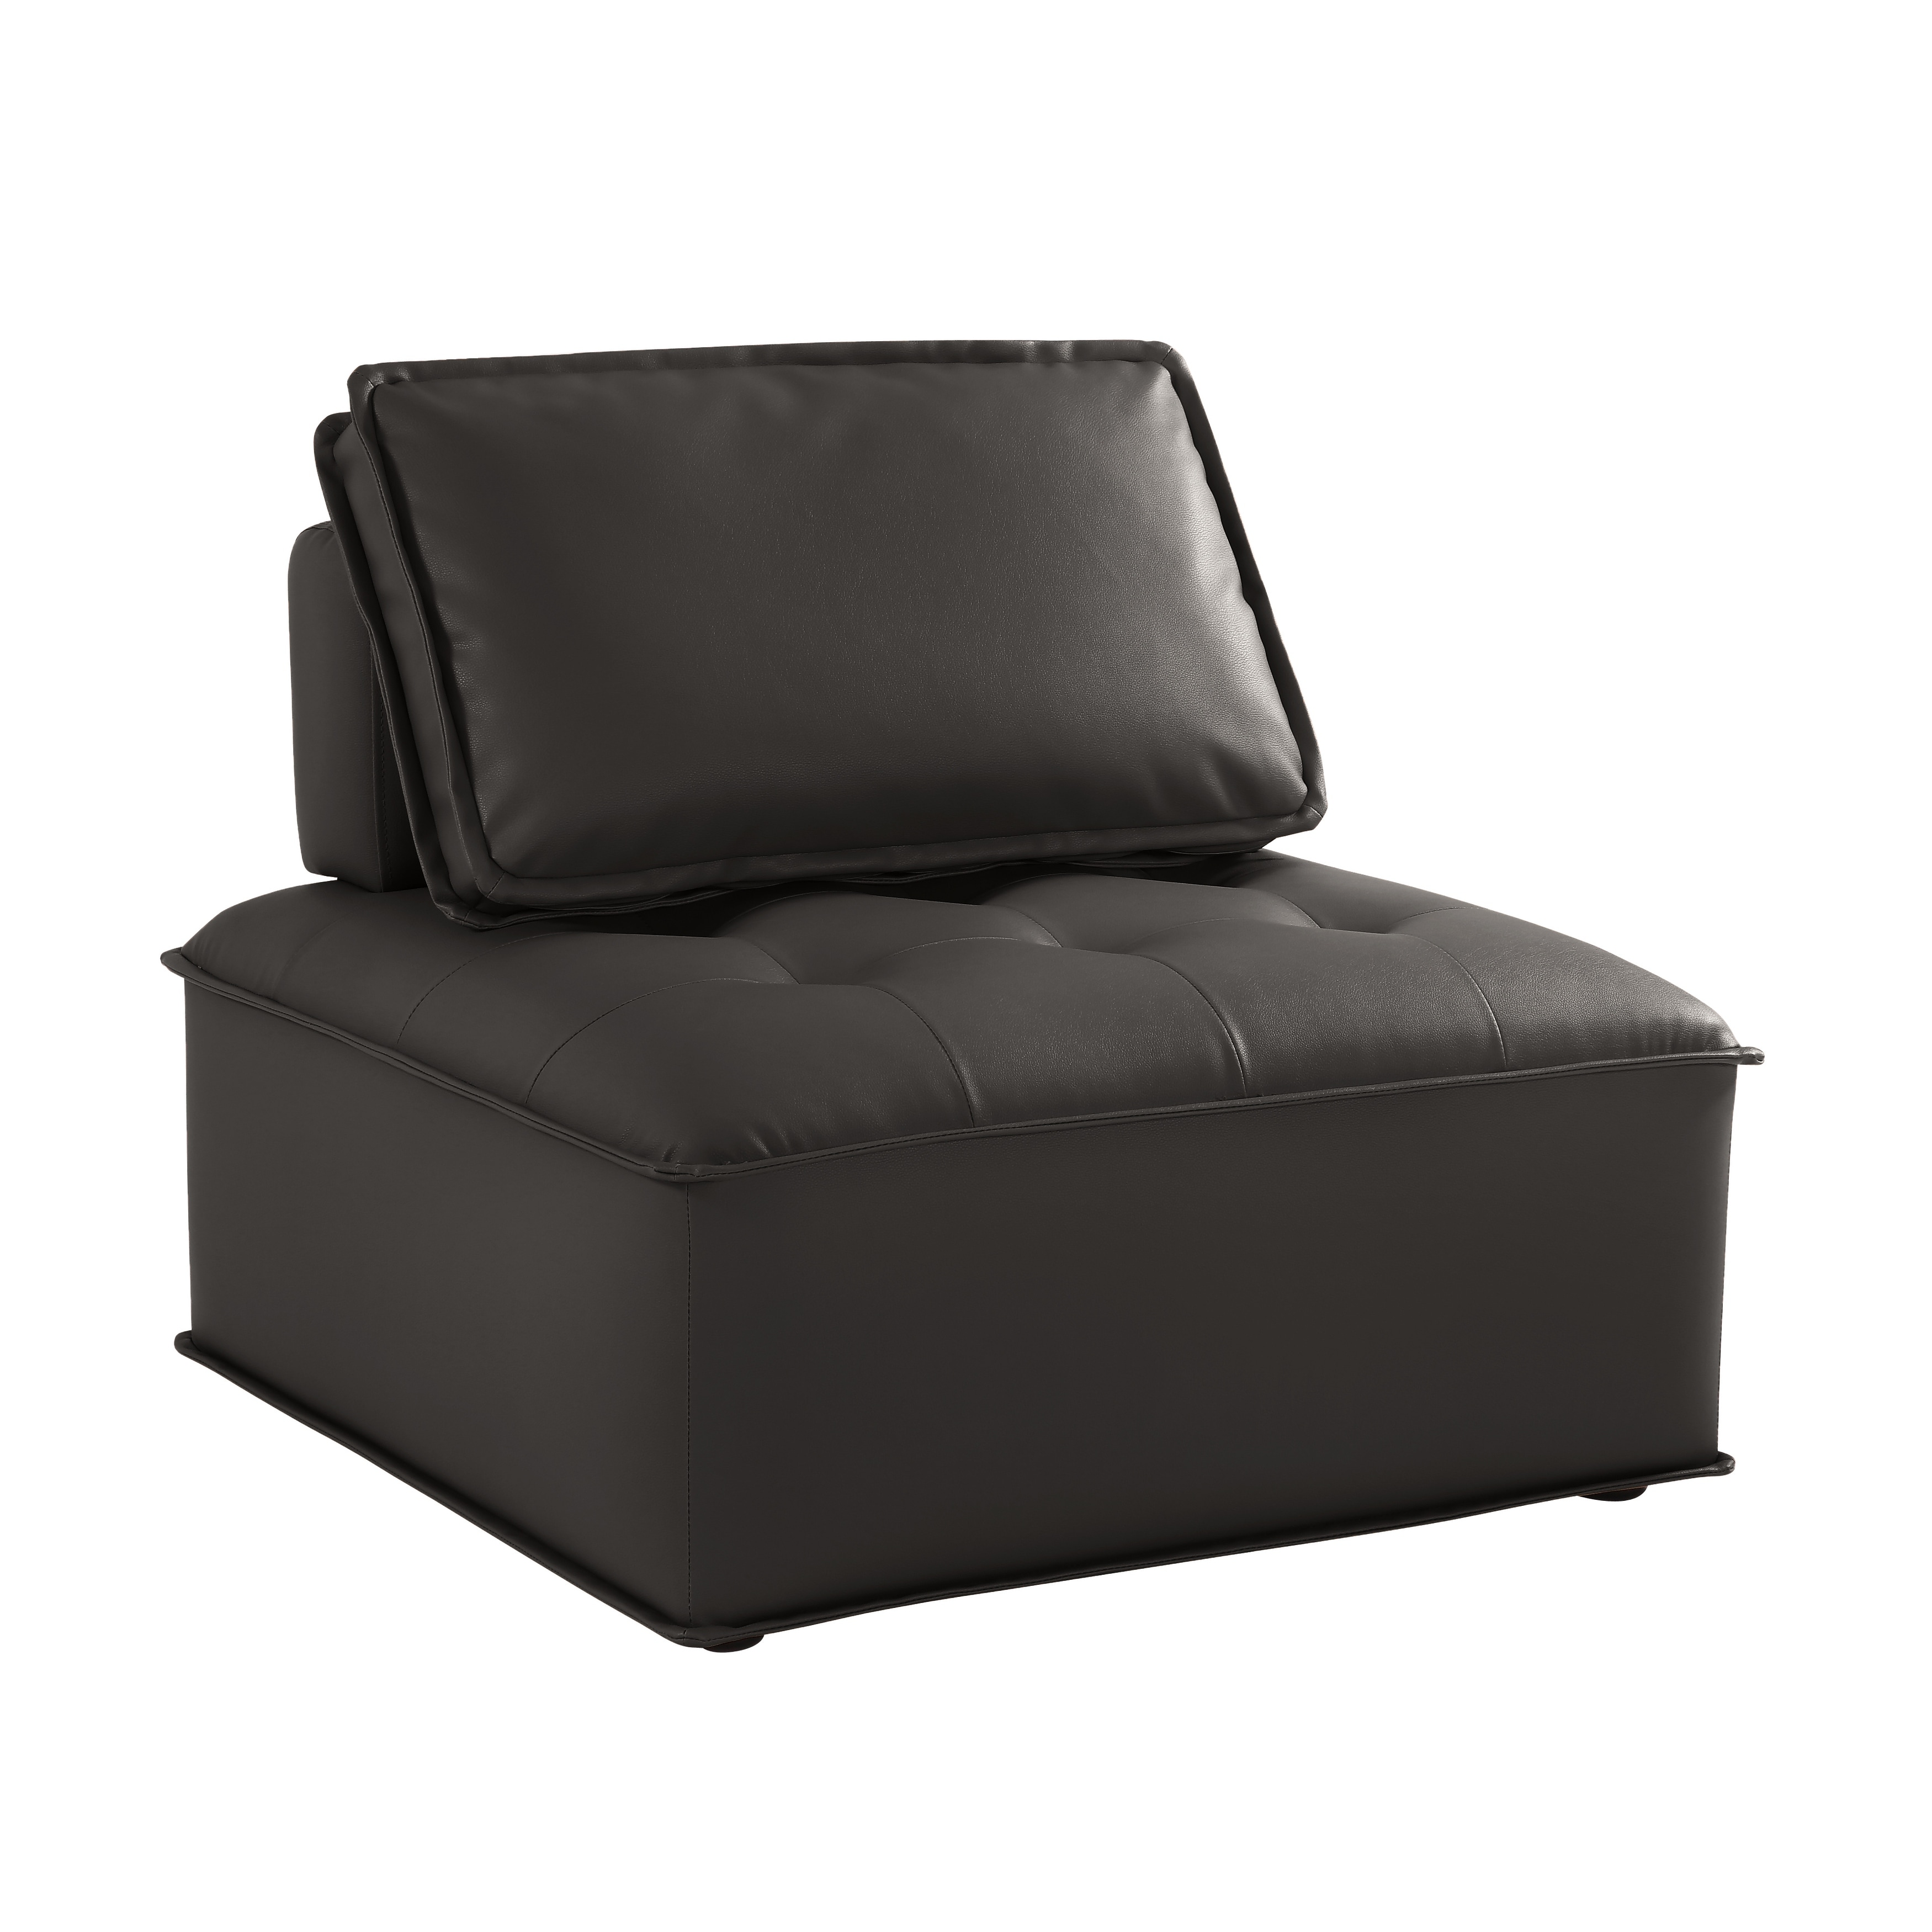 Stevig stok Plak opnieuw Modern Lounge Chairs Single Sofa Chair, Leather Upholstered Backrest and  Seat Cushion - Overstock - 36951721